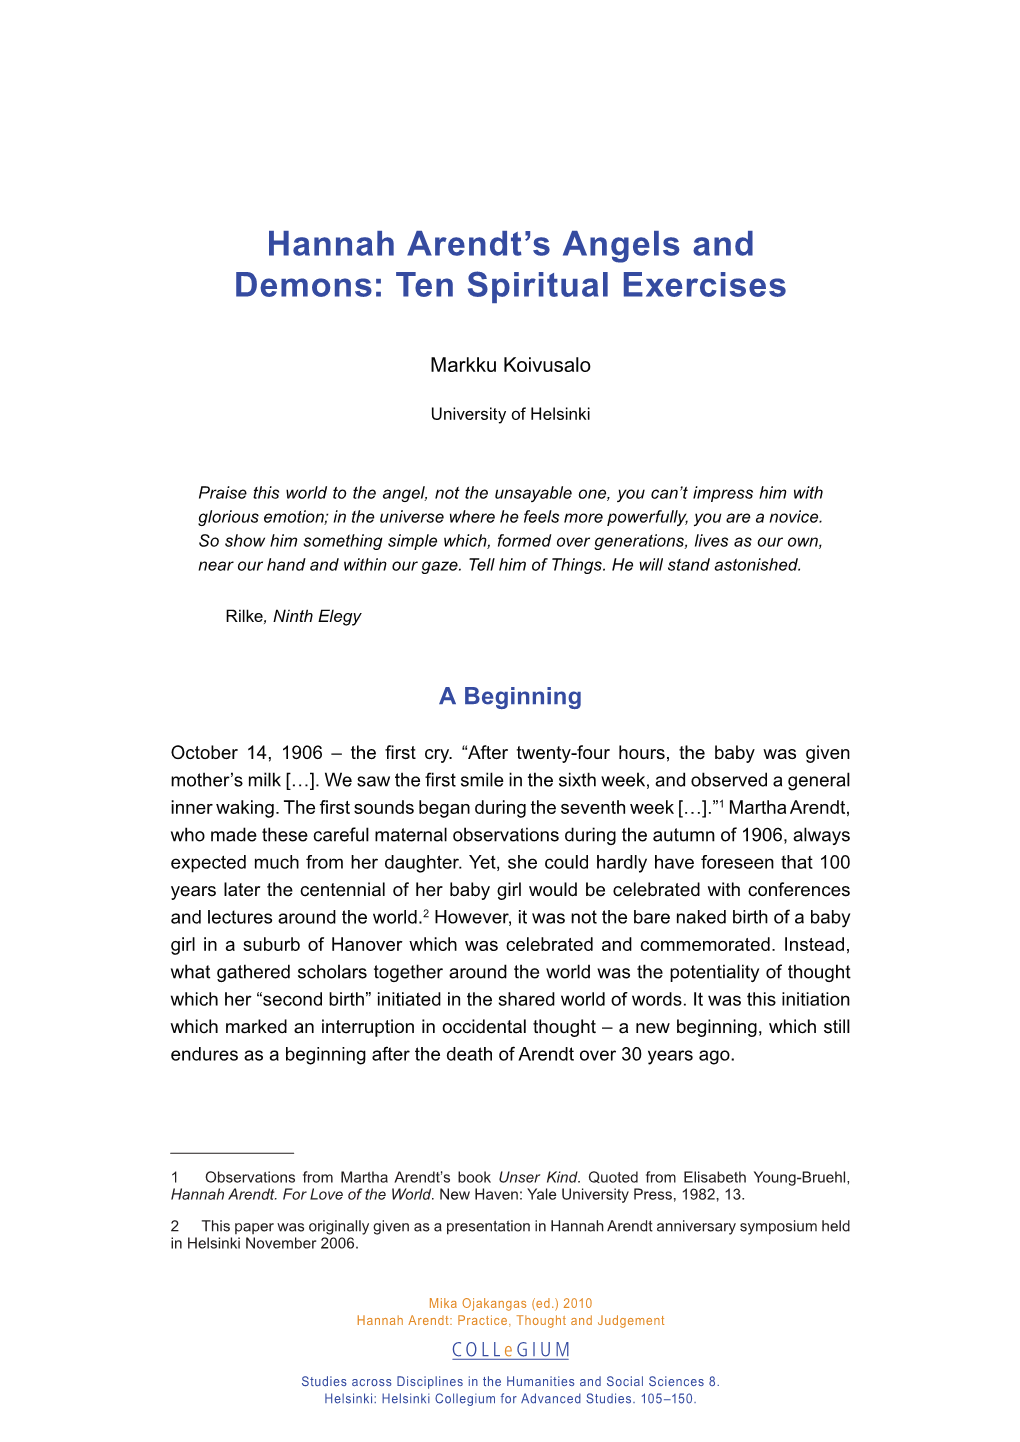 Hannah Arendt's Angels and Demons